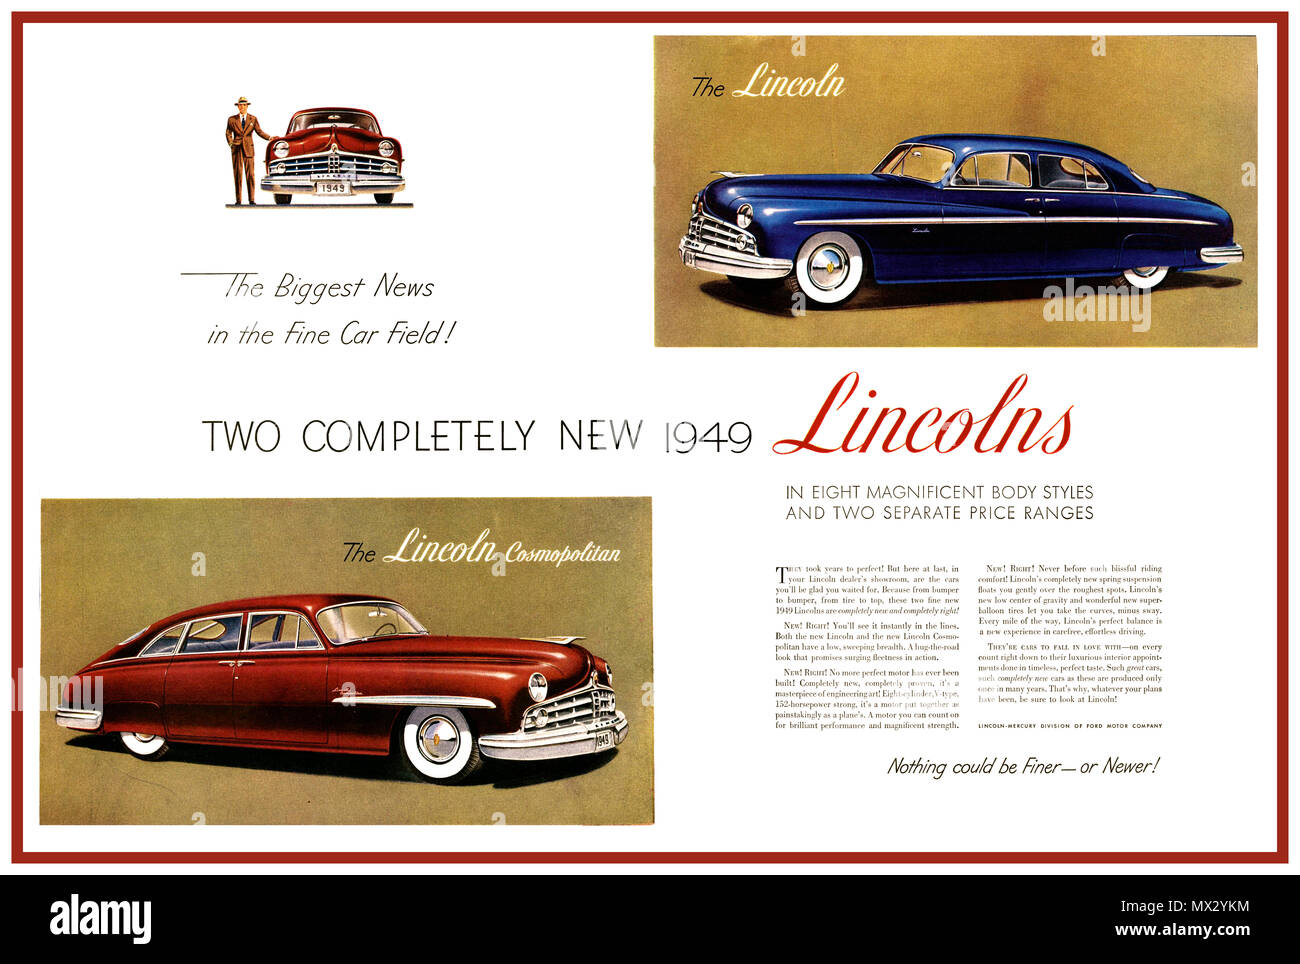 1949 Vintage LINCOLN Luxury American Car advertisement poster ad for The Lincoln and The Lincoln Cosmopolitan automobile motorcar 'the biggest news in the fine car field' Stock Photo